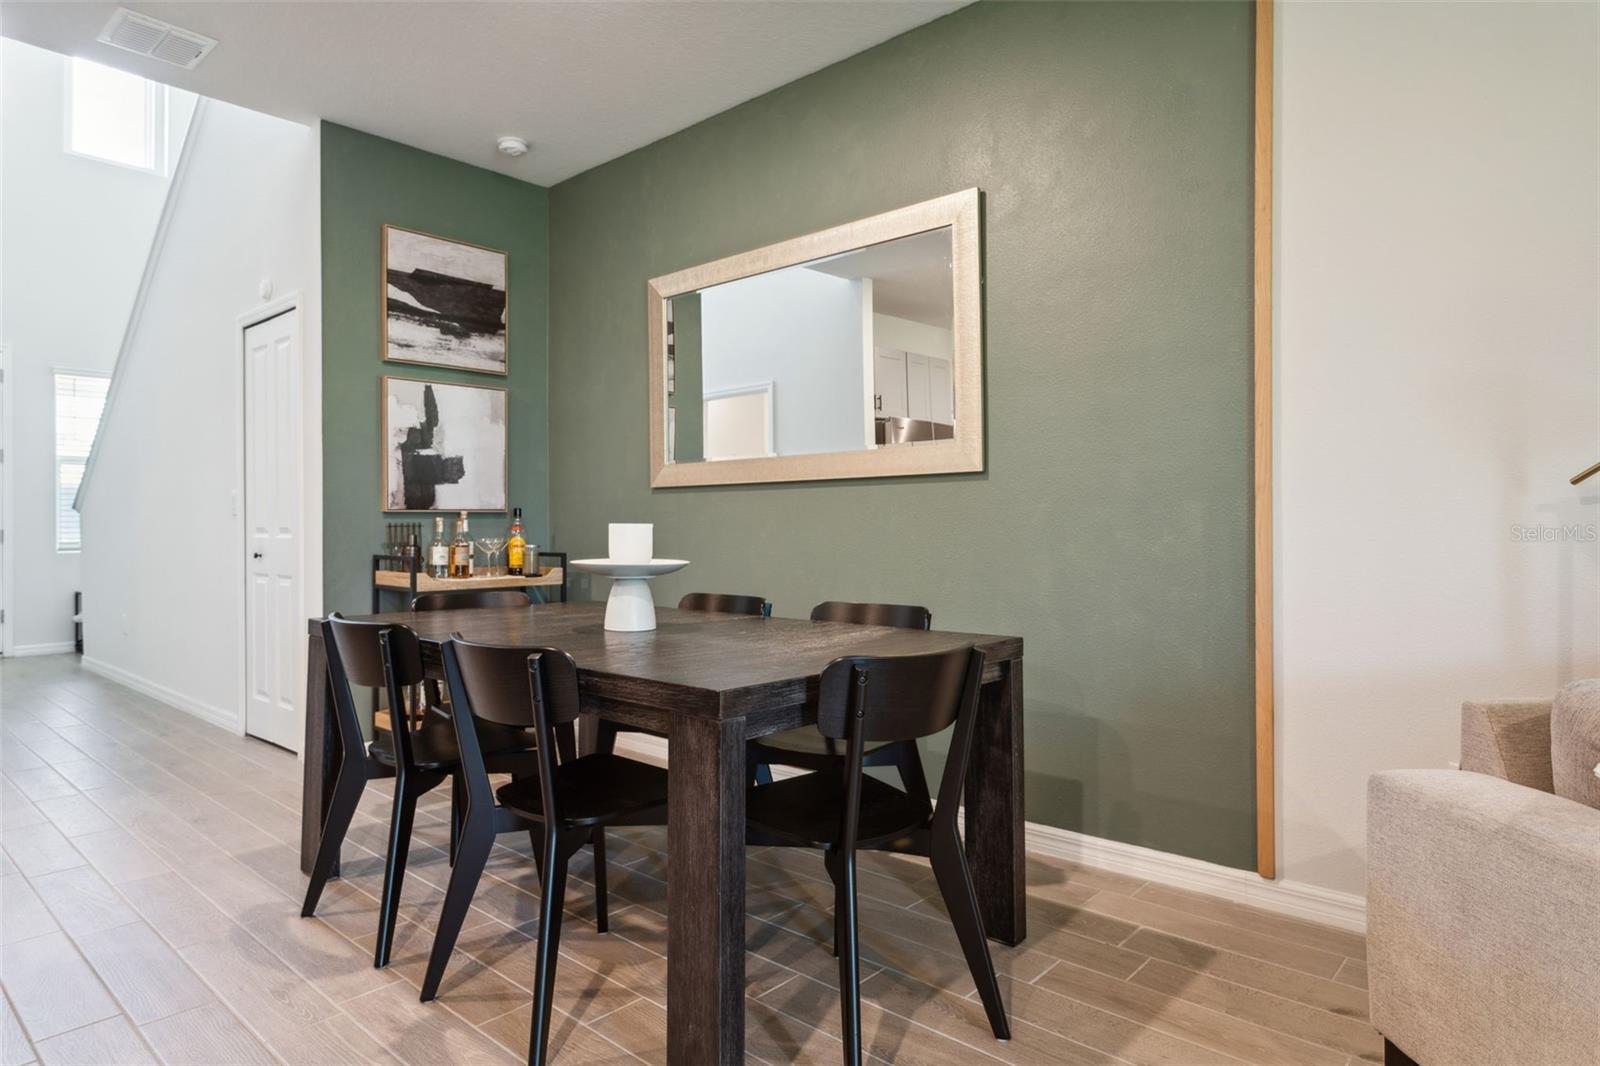 Dining area with accented wall easily seats 6-8.